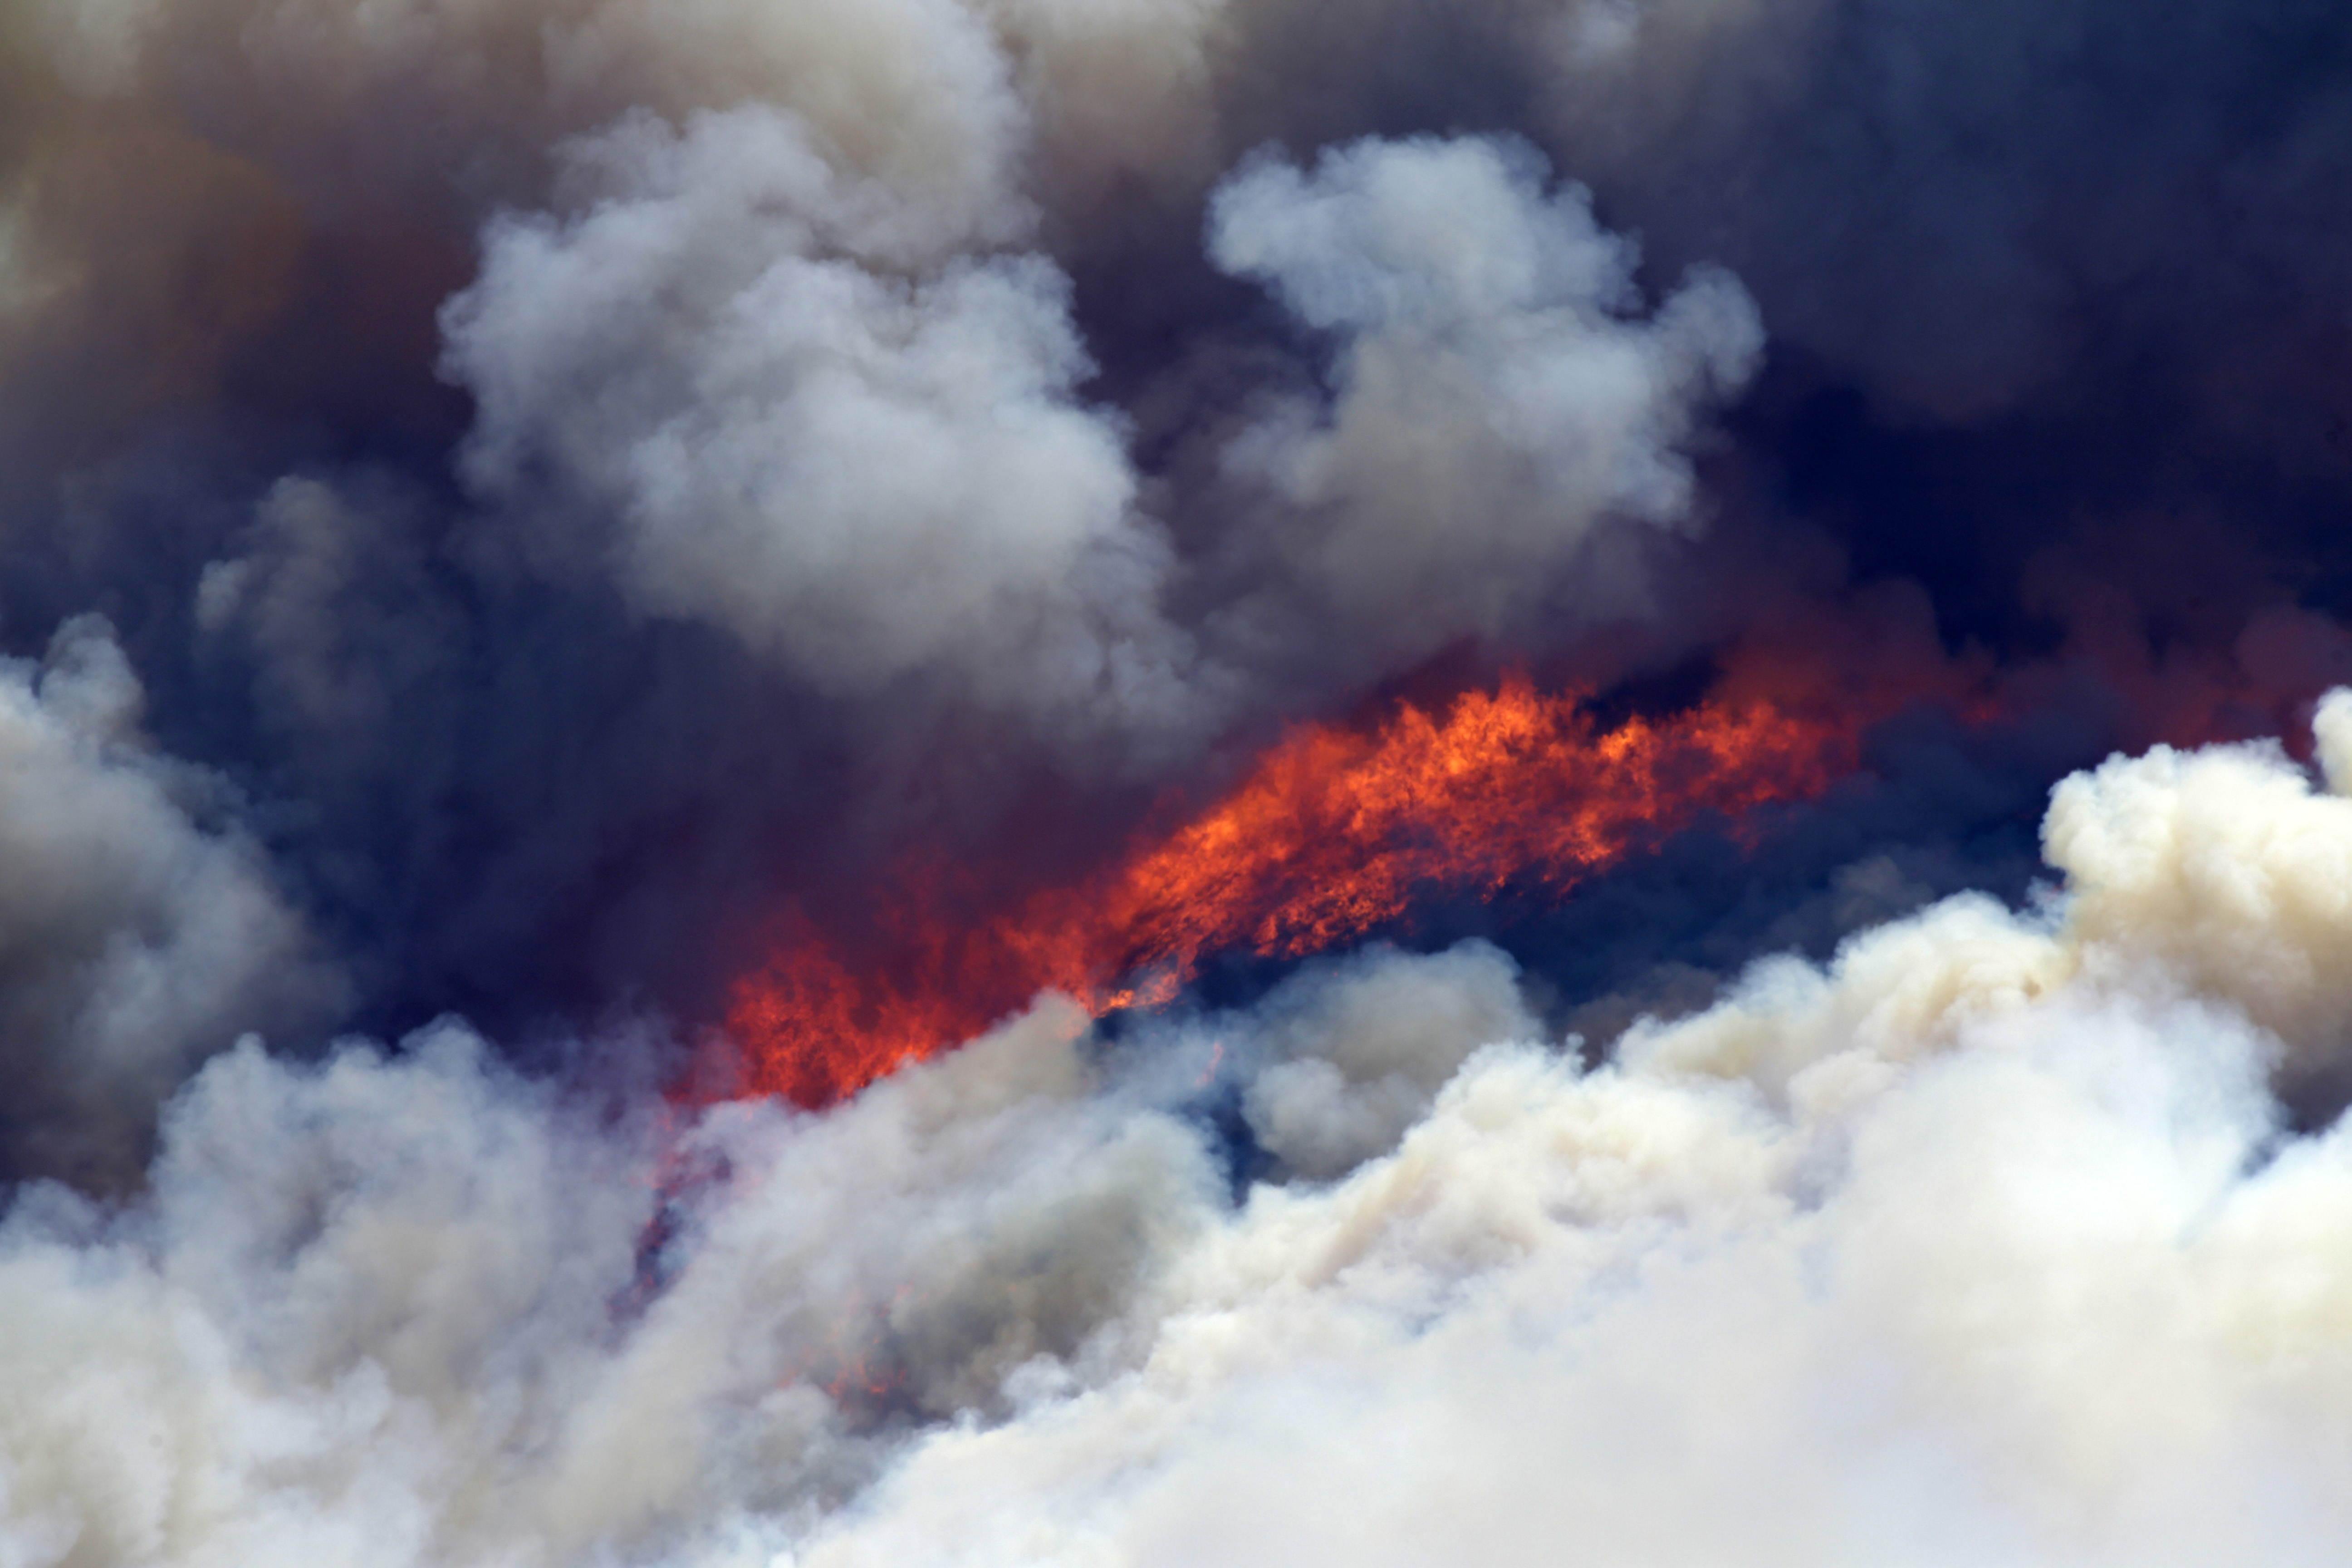 A fire burns on the mountain of Ymittos, in the eastern suburbs of Athens on Friday, July 17, 2015. The brush fire broke out on the outskirts of the Greek capital, burning across a hillside and blanketing parts of Athens in thick smoke. The blaze moved fast, fanned by strong winds and devouring parts of a verdant hillside popular with day-trippers. Photo: AP